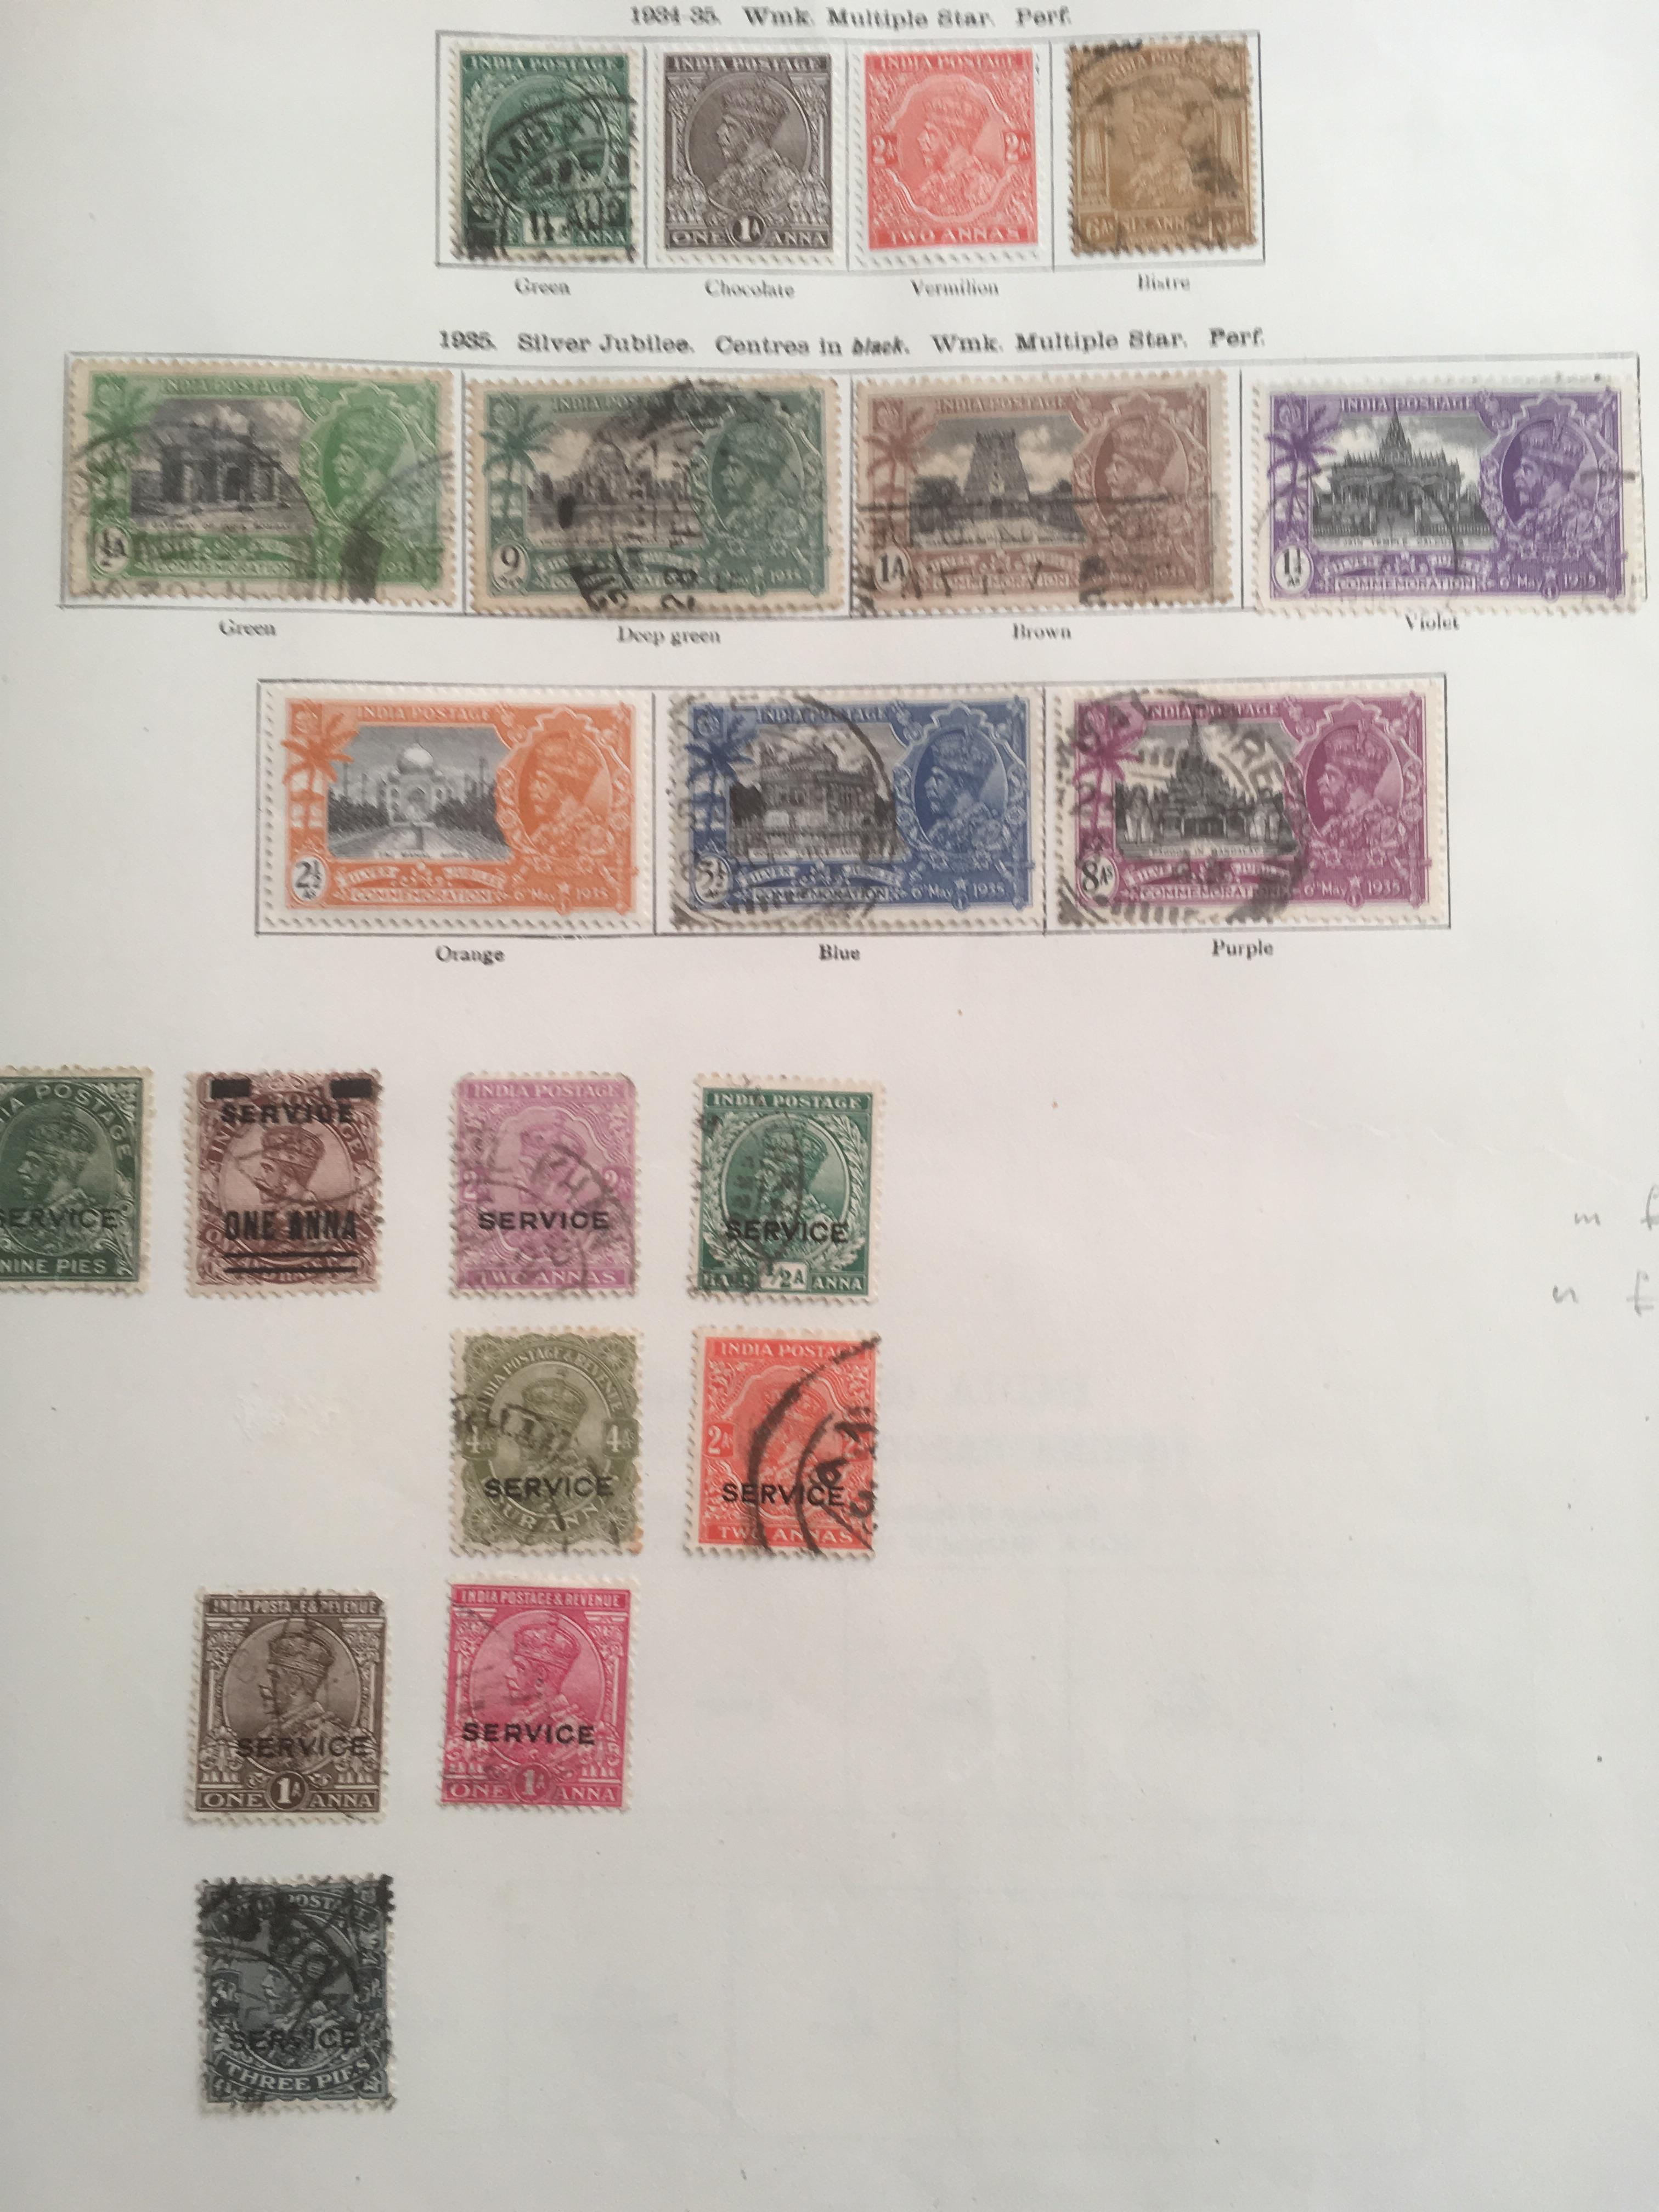 SG NEW IDEAL ALBUM WITH A MIXED MINT AND USED COLLECTION INCLUDING AUSTRALIA, BARBADOS, - Image 10 of 17